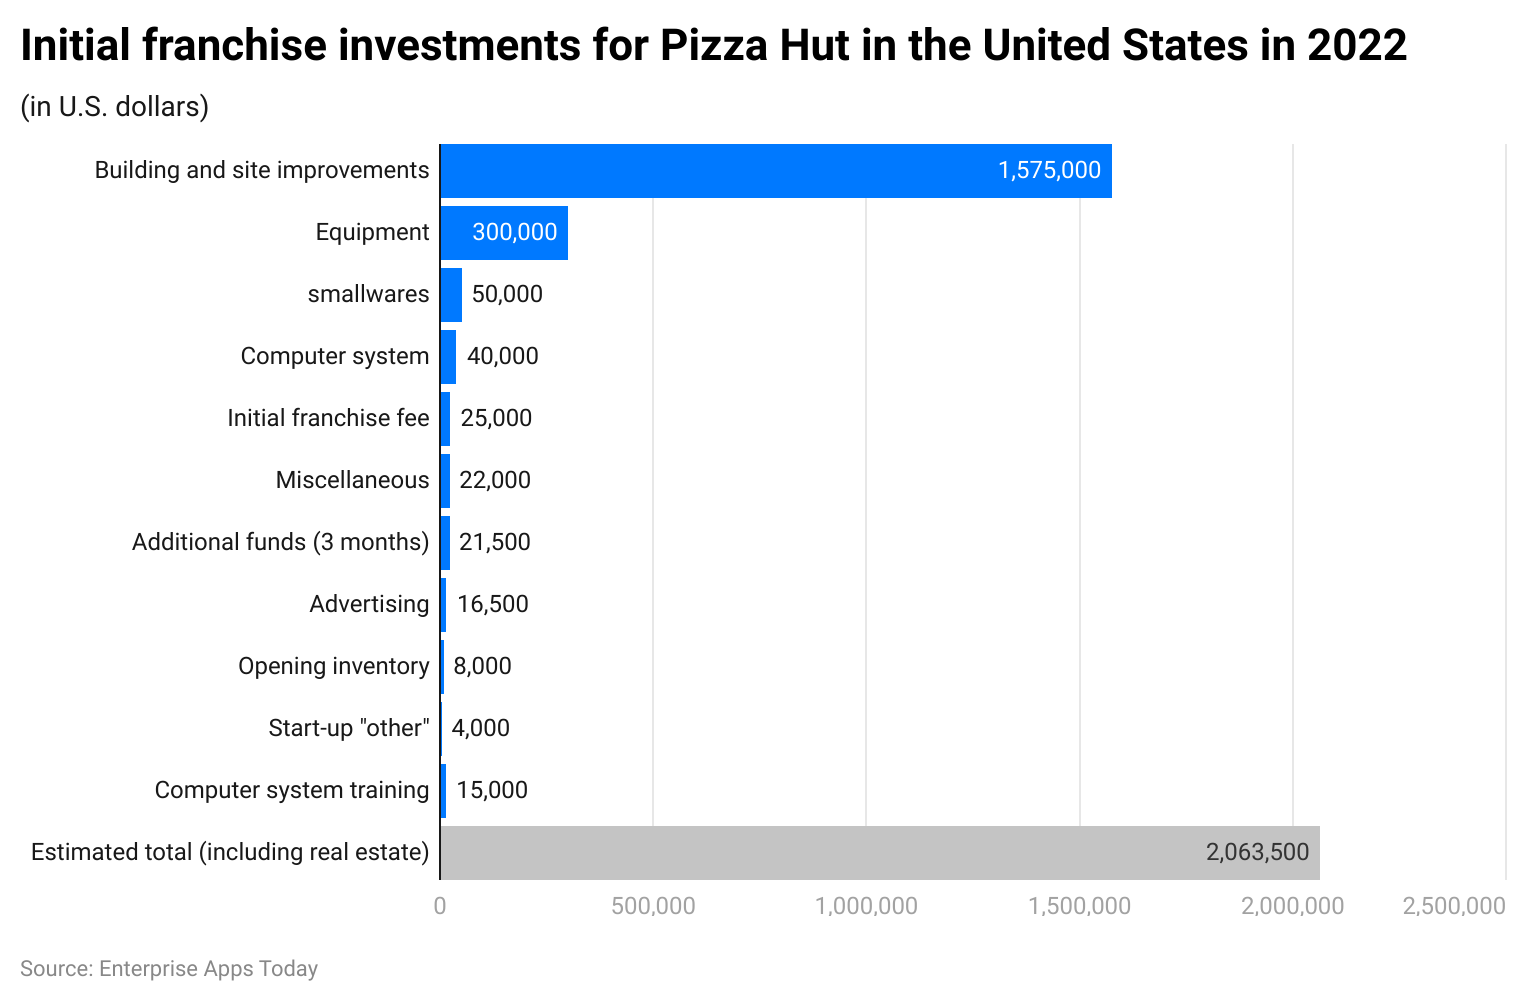 initial-franchise-investments-for-pizza-hut-in-the-united-states-in-2022